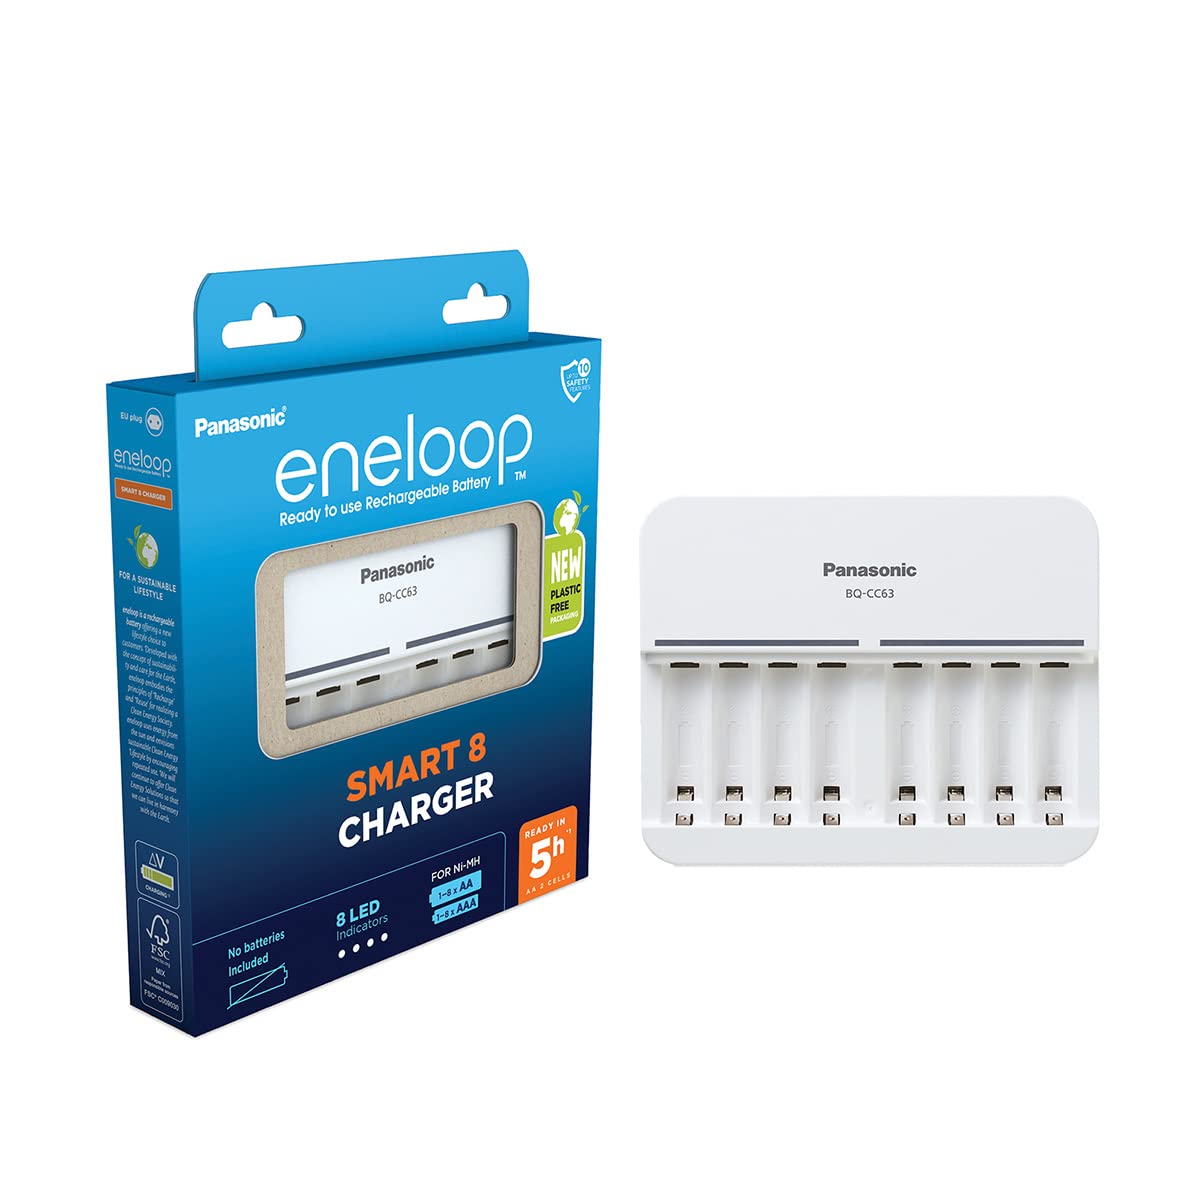 Panasonic eneloop Smart 8 Charger for 1-8 AA/AAA NI-MH Batteries, with 8 LED Indicators and 9 Safety Functions, Blue